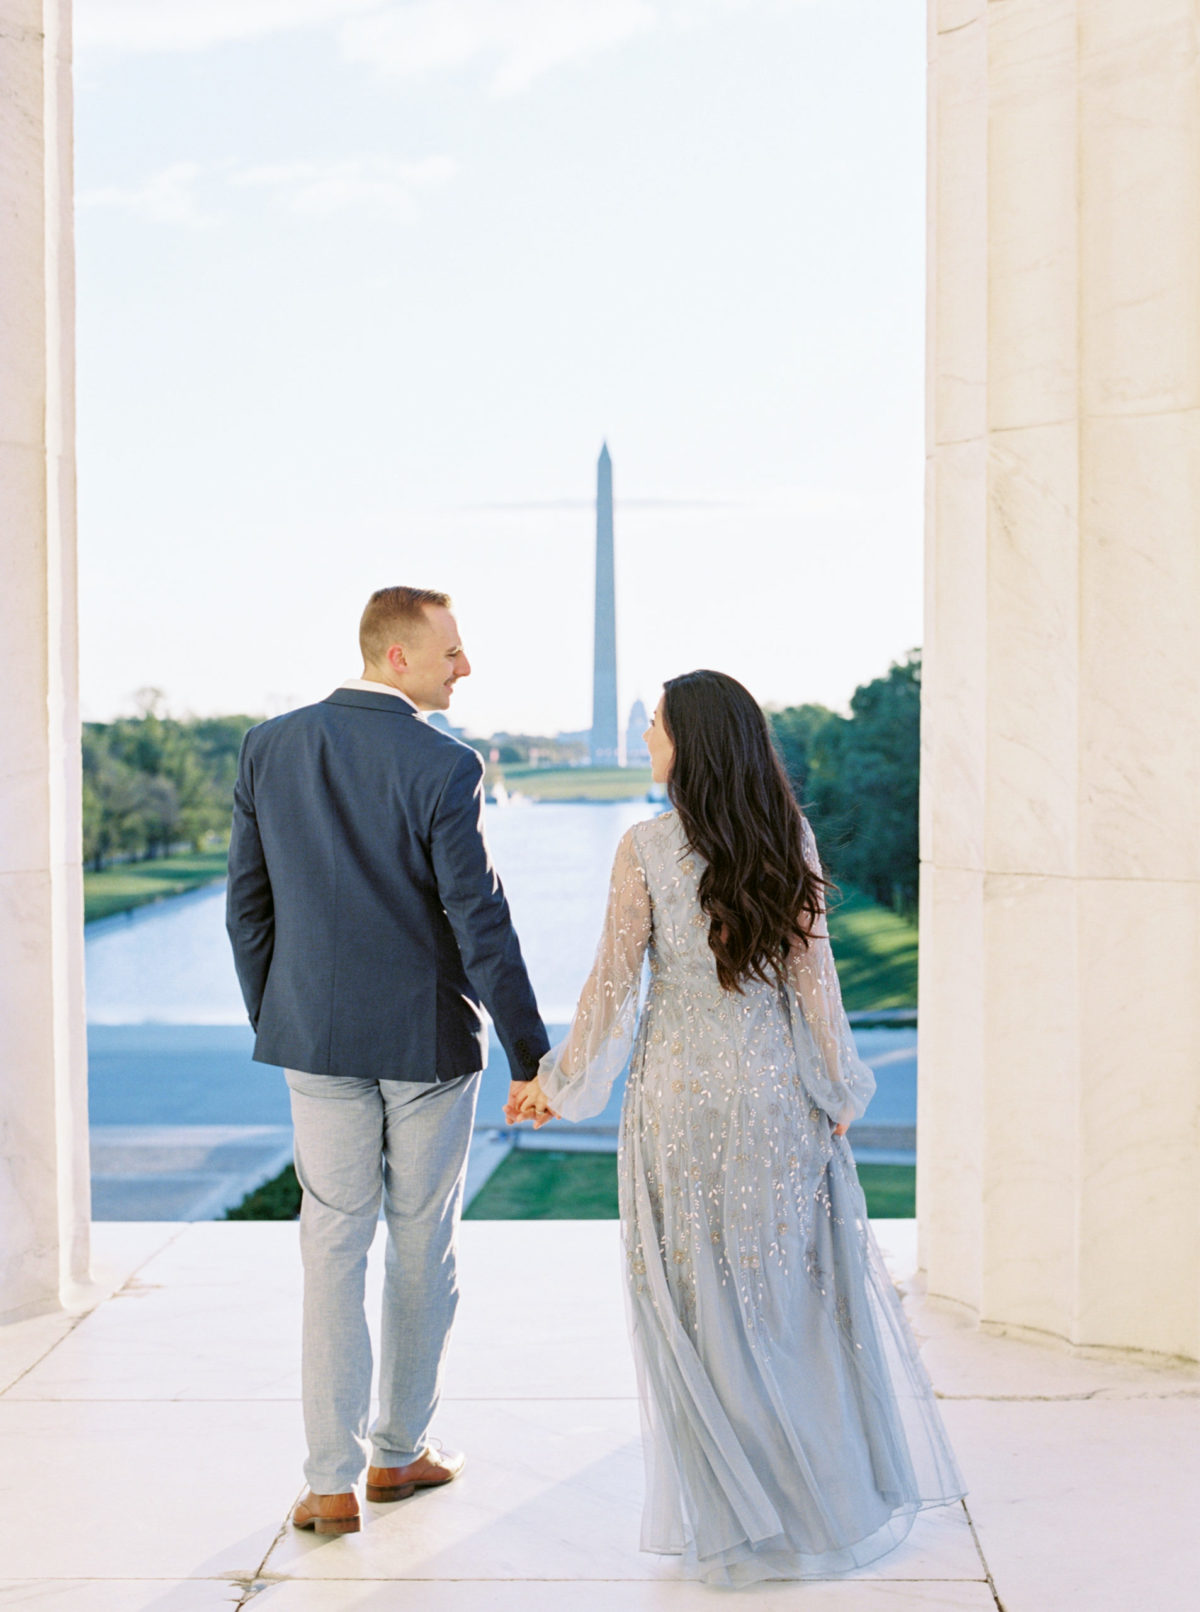 Sunrise engagement session at the Lincoln Memorial